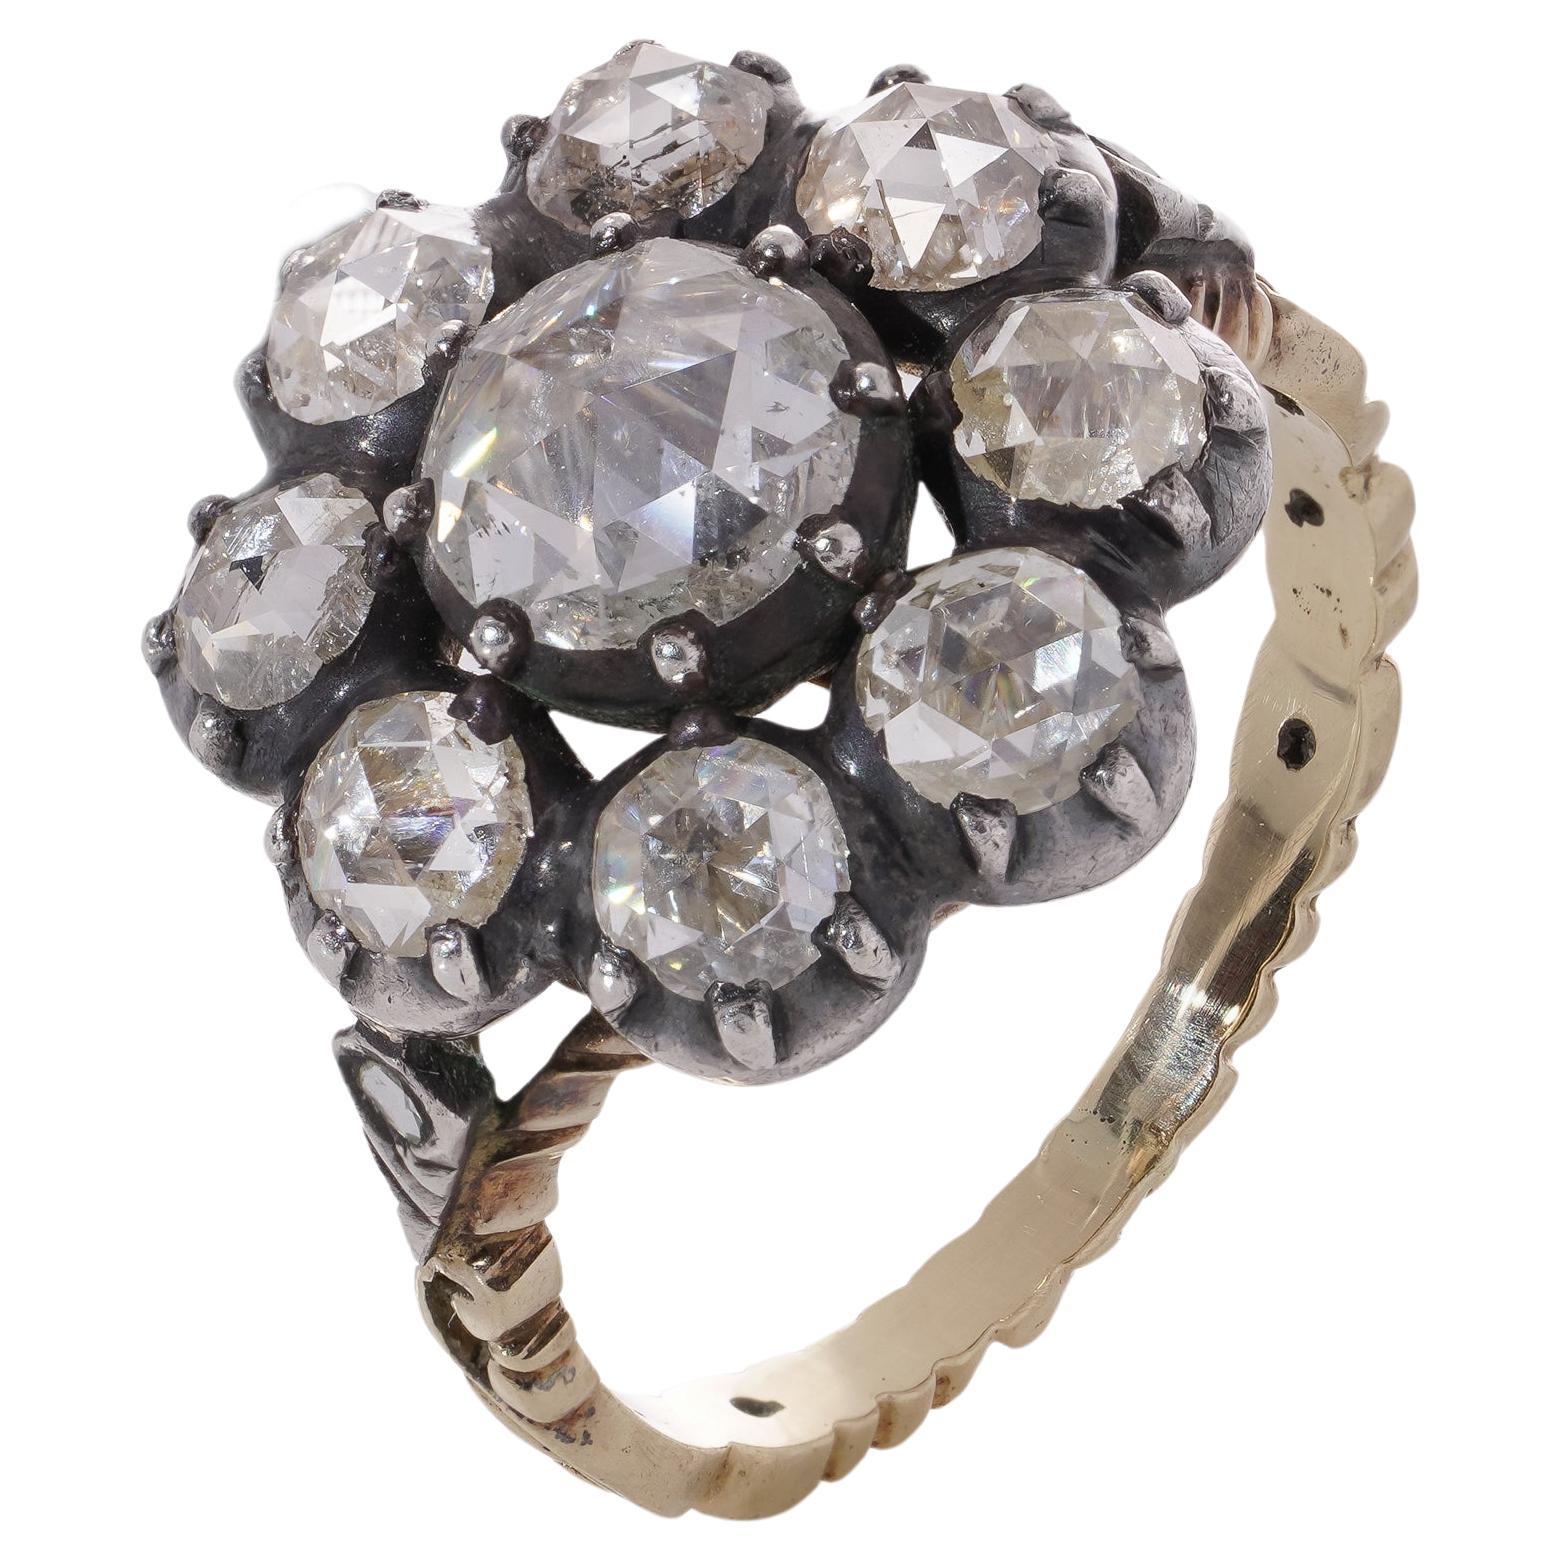  14kt. yellow gold and silver 3.12 carats of rose-cut diamonds ring  For Sale